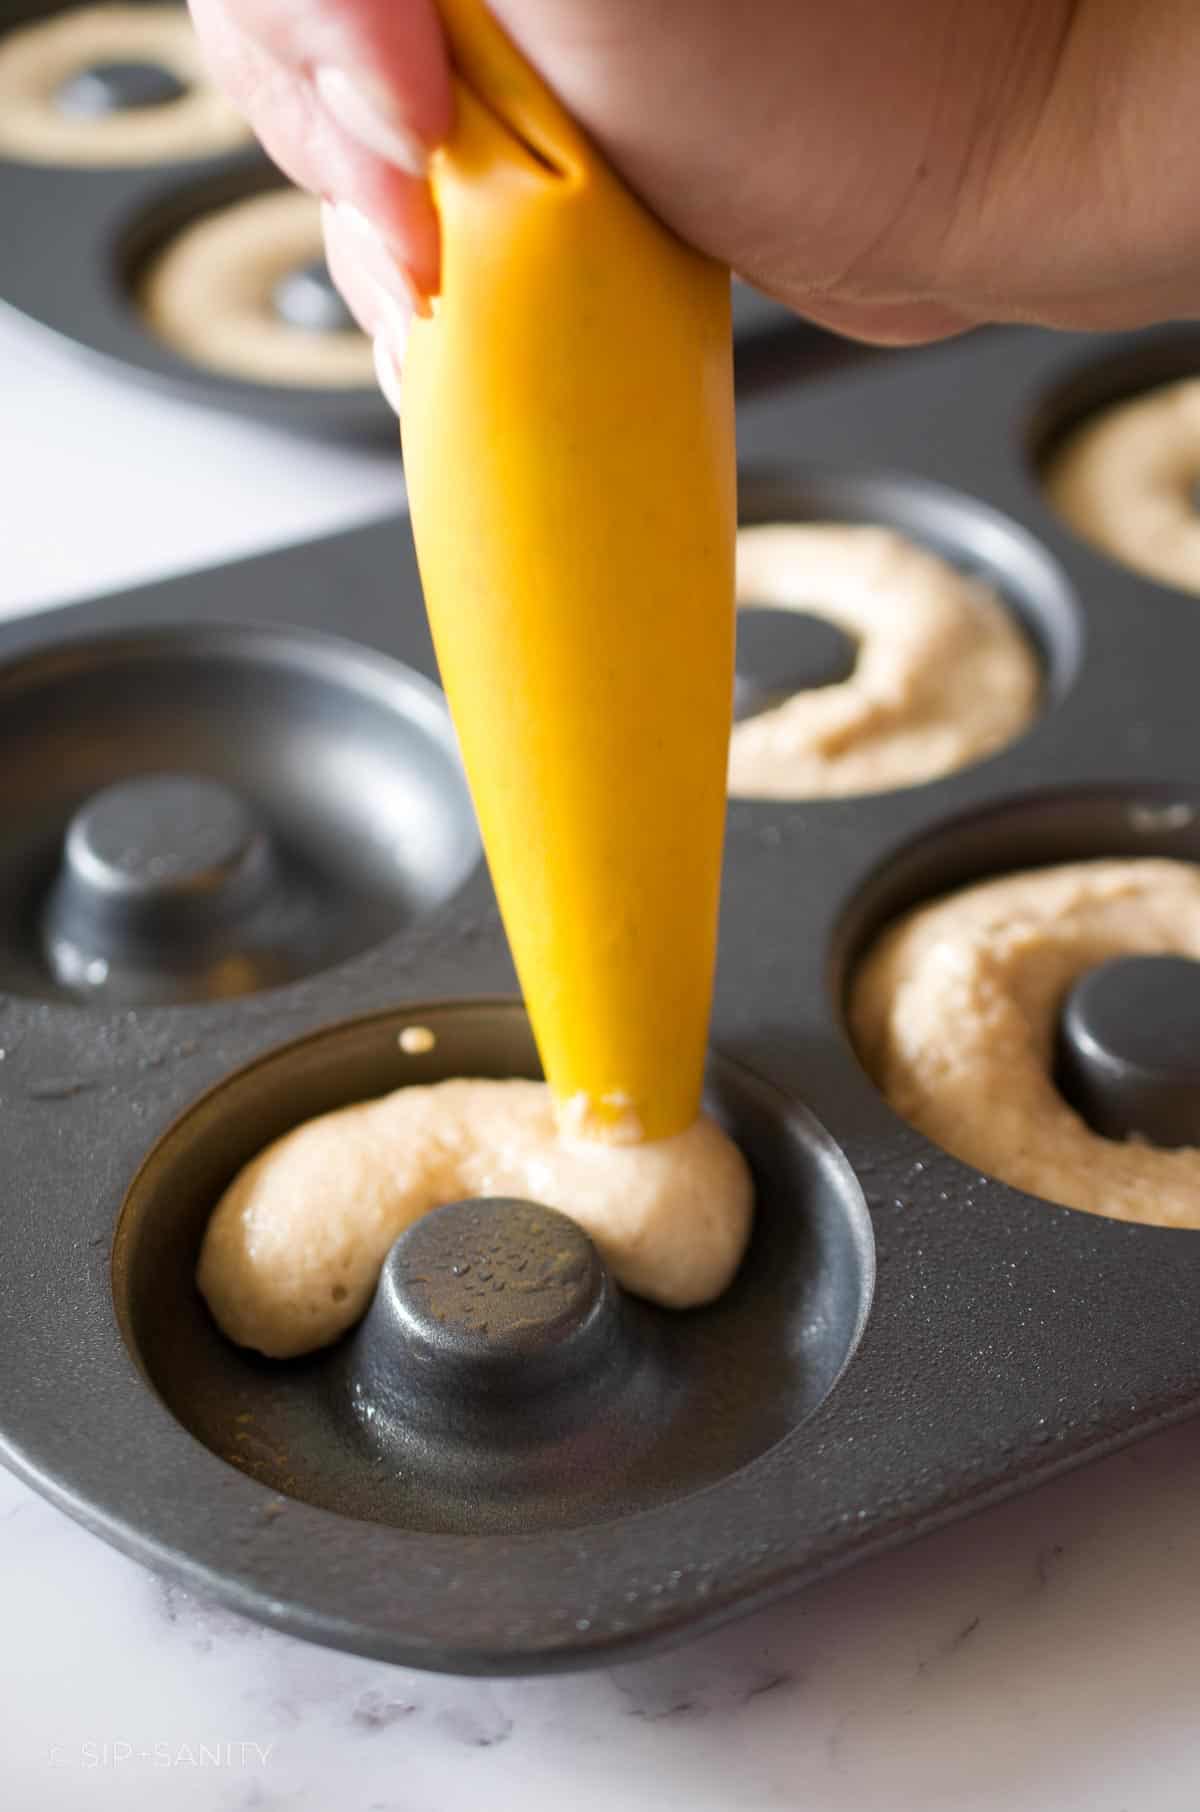 Piping donut batter into a baked donut pan.